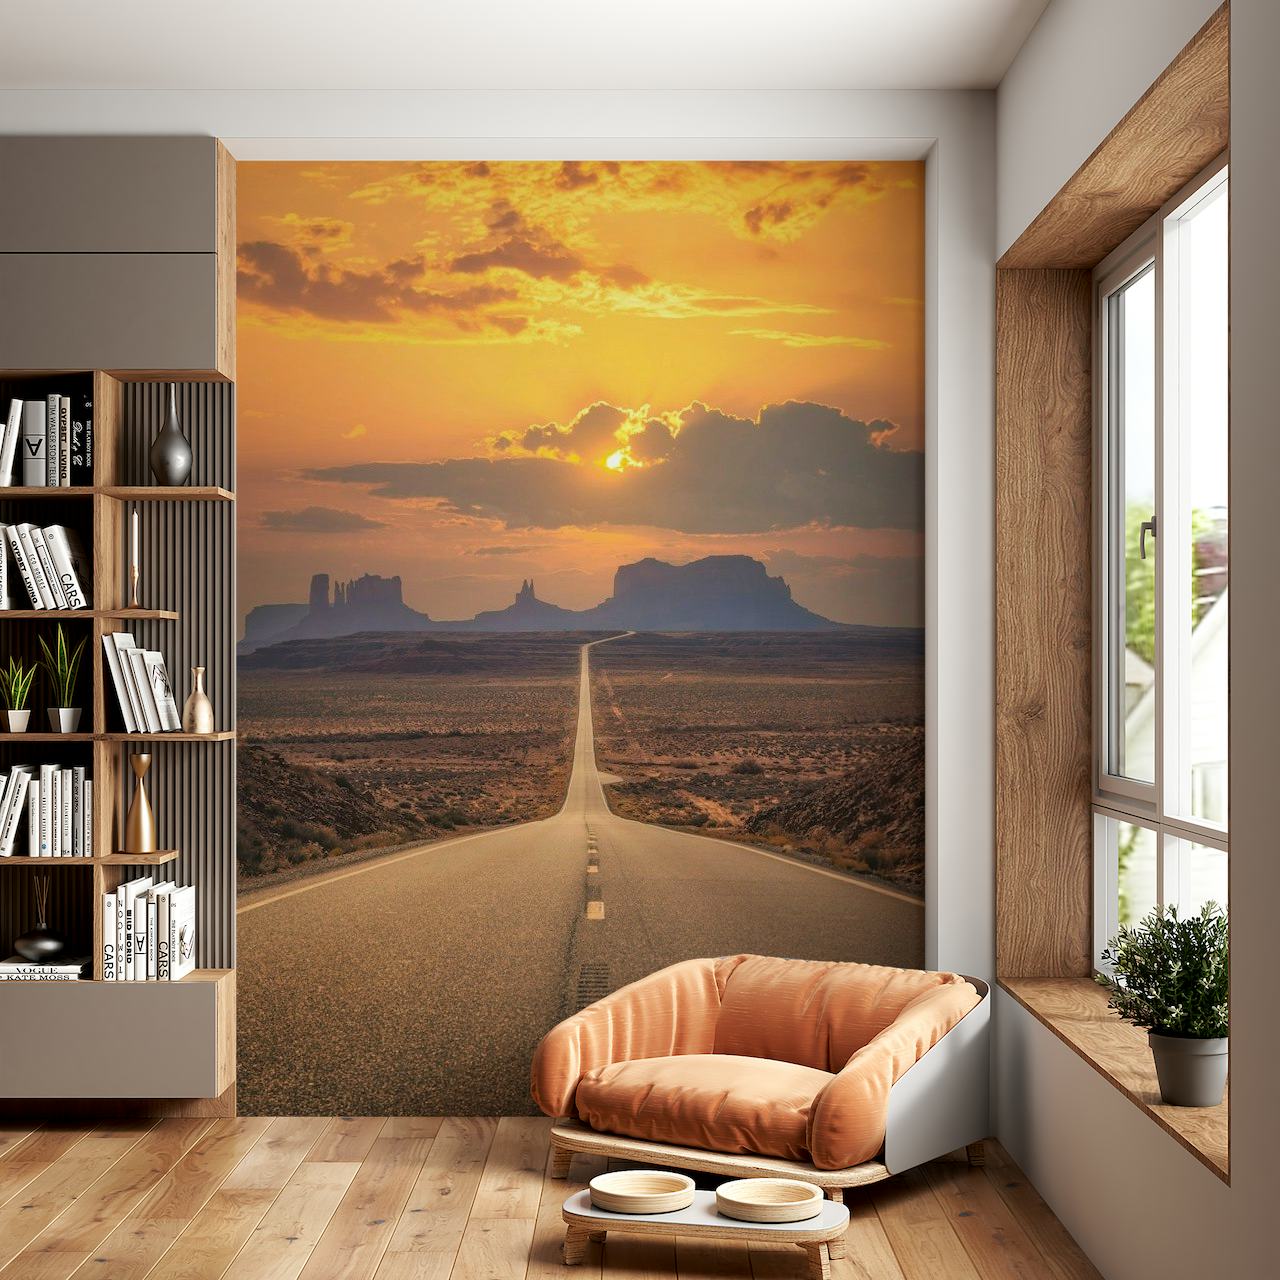 Famous Forrest Gump Road - Monument Valley wallpaper